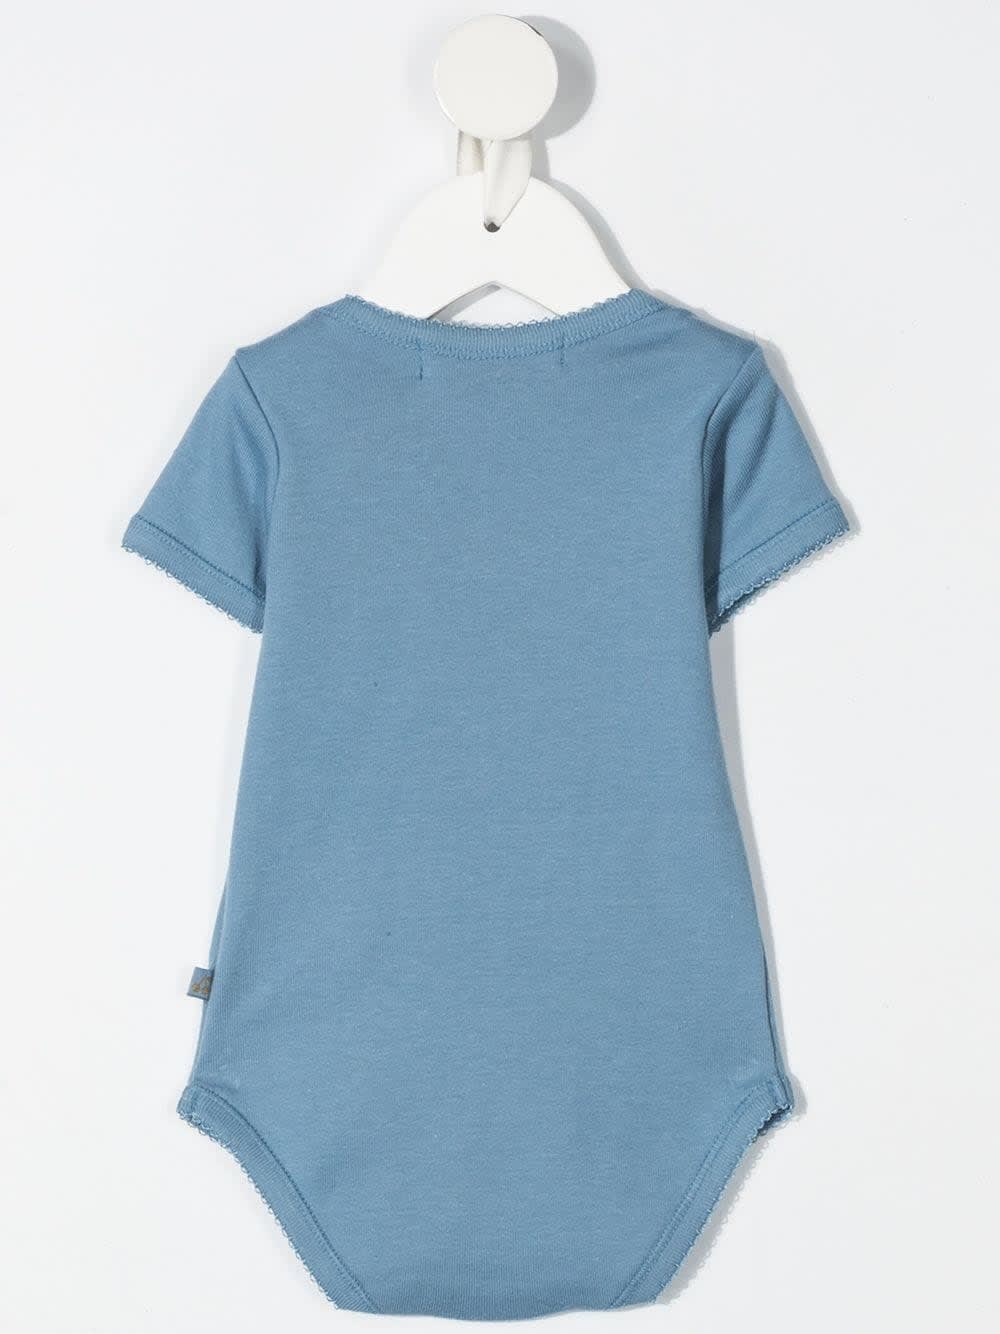 Shop Bonpoint 3 Body Pack In Light Blue And White Cotton